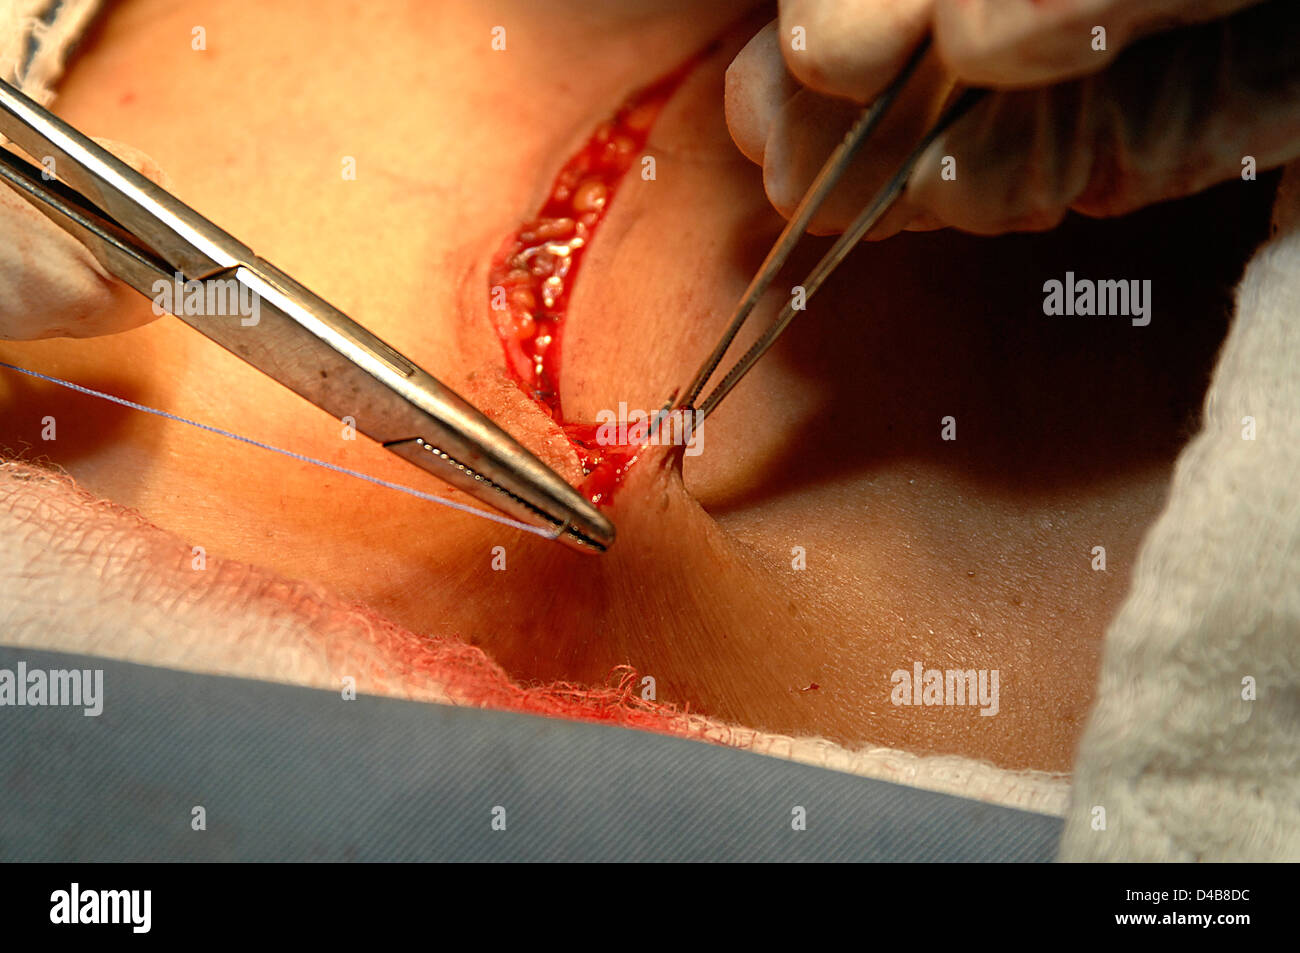 Surgical team stitch wound, after successful removal of goiter, during Thyroidectomy. Sudan, Africa. Stock Photo